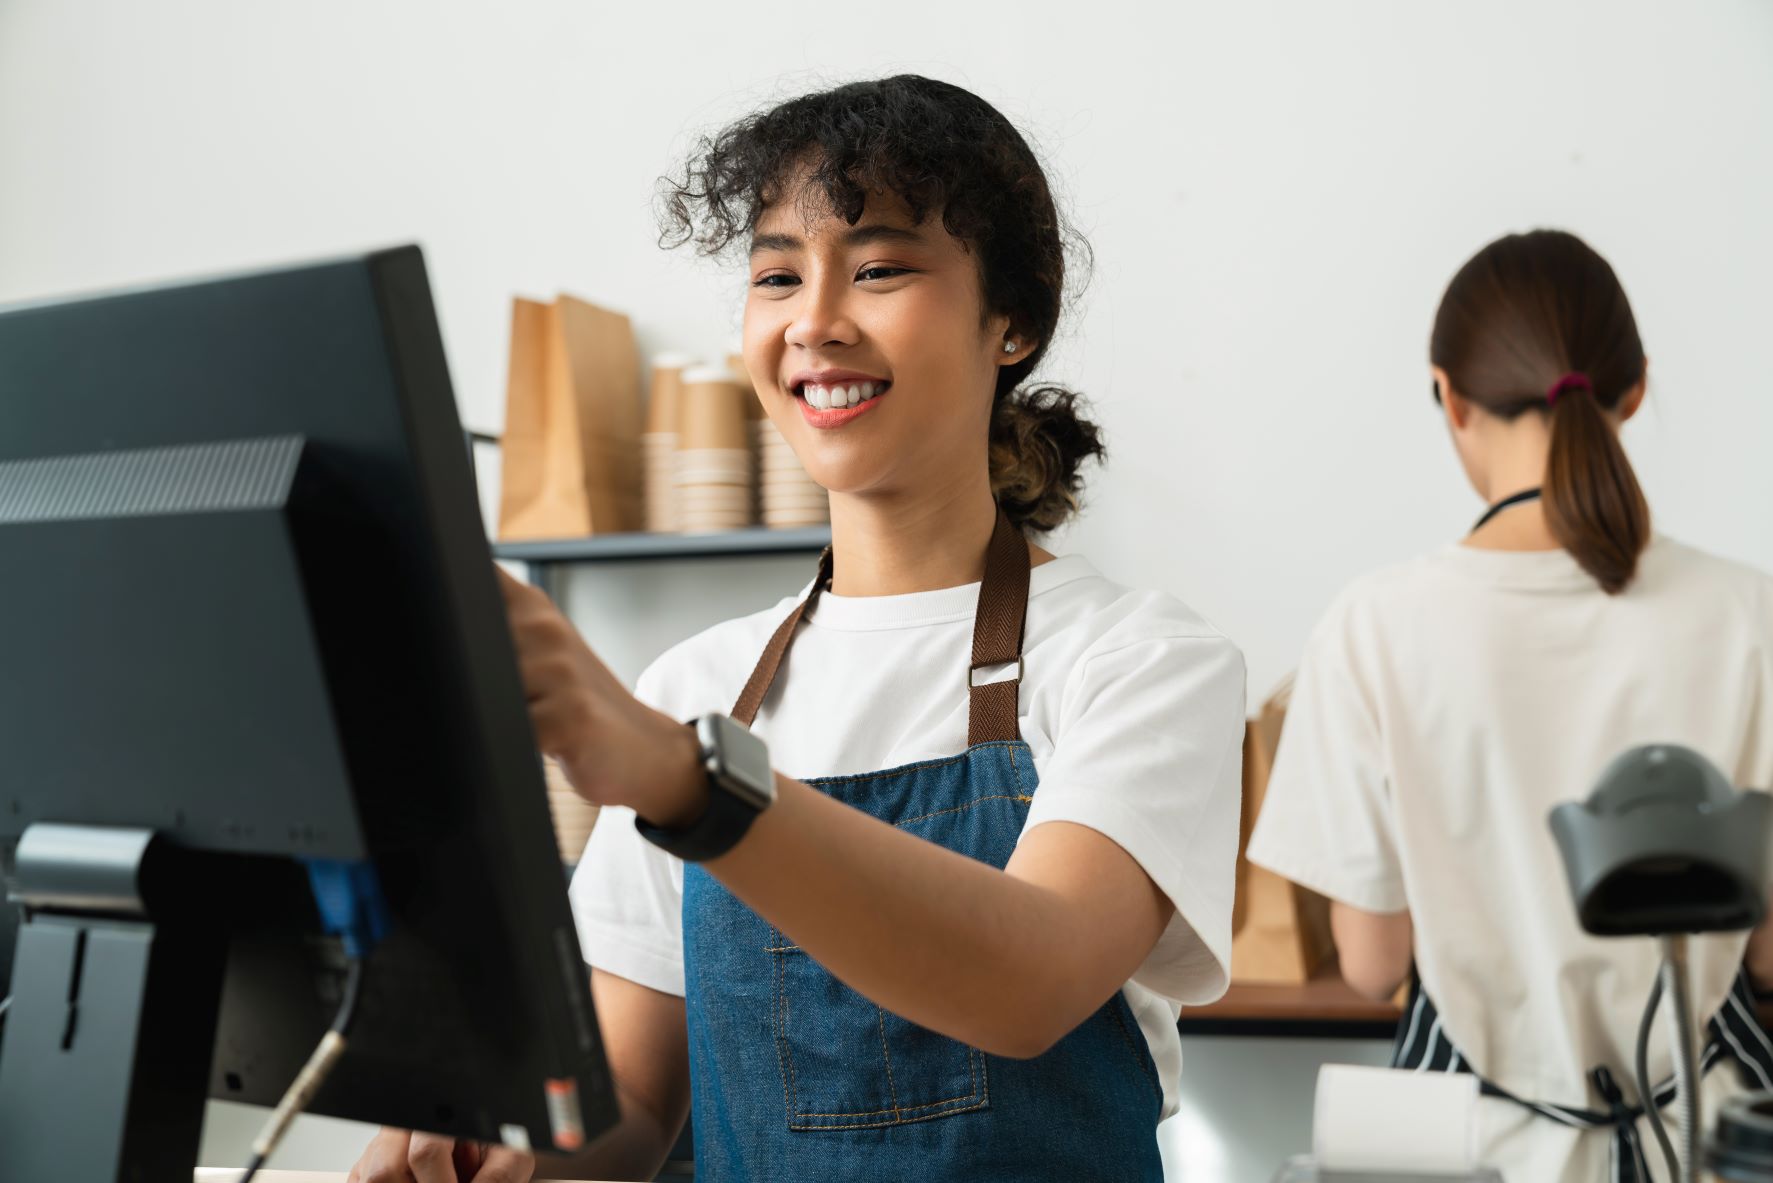 What to Look for When Choosing a POS for Your Restaurant